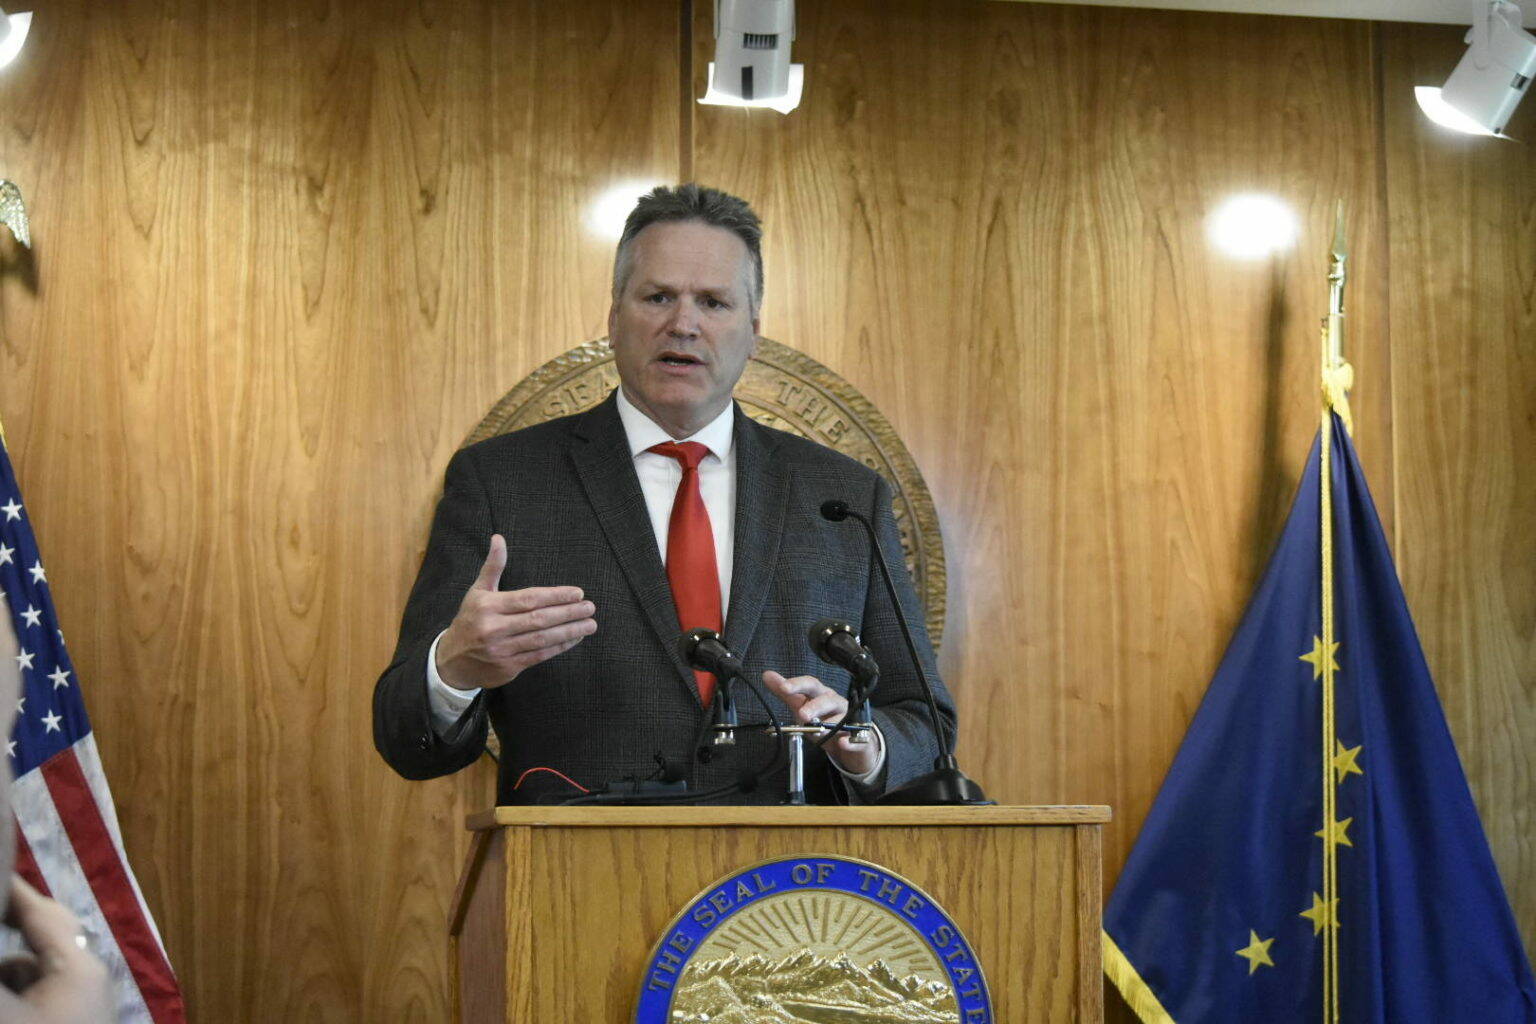 This photo shows Gov. Mike Dunleavy speaking at a July 2021 news conference.In a statement on Tuesday, Dunleavy said he would not veto the $1,100 Permanent Fund dividend passed by the Legislature. (Peter Segall / Juneau Empire File)